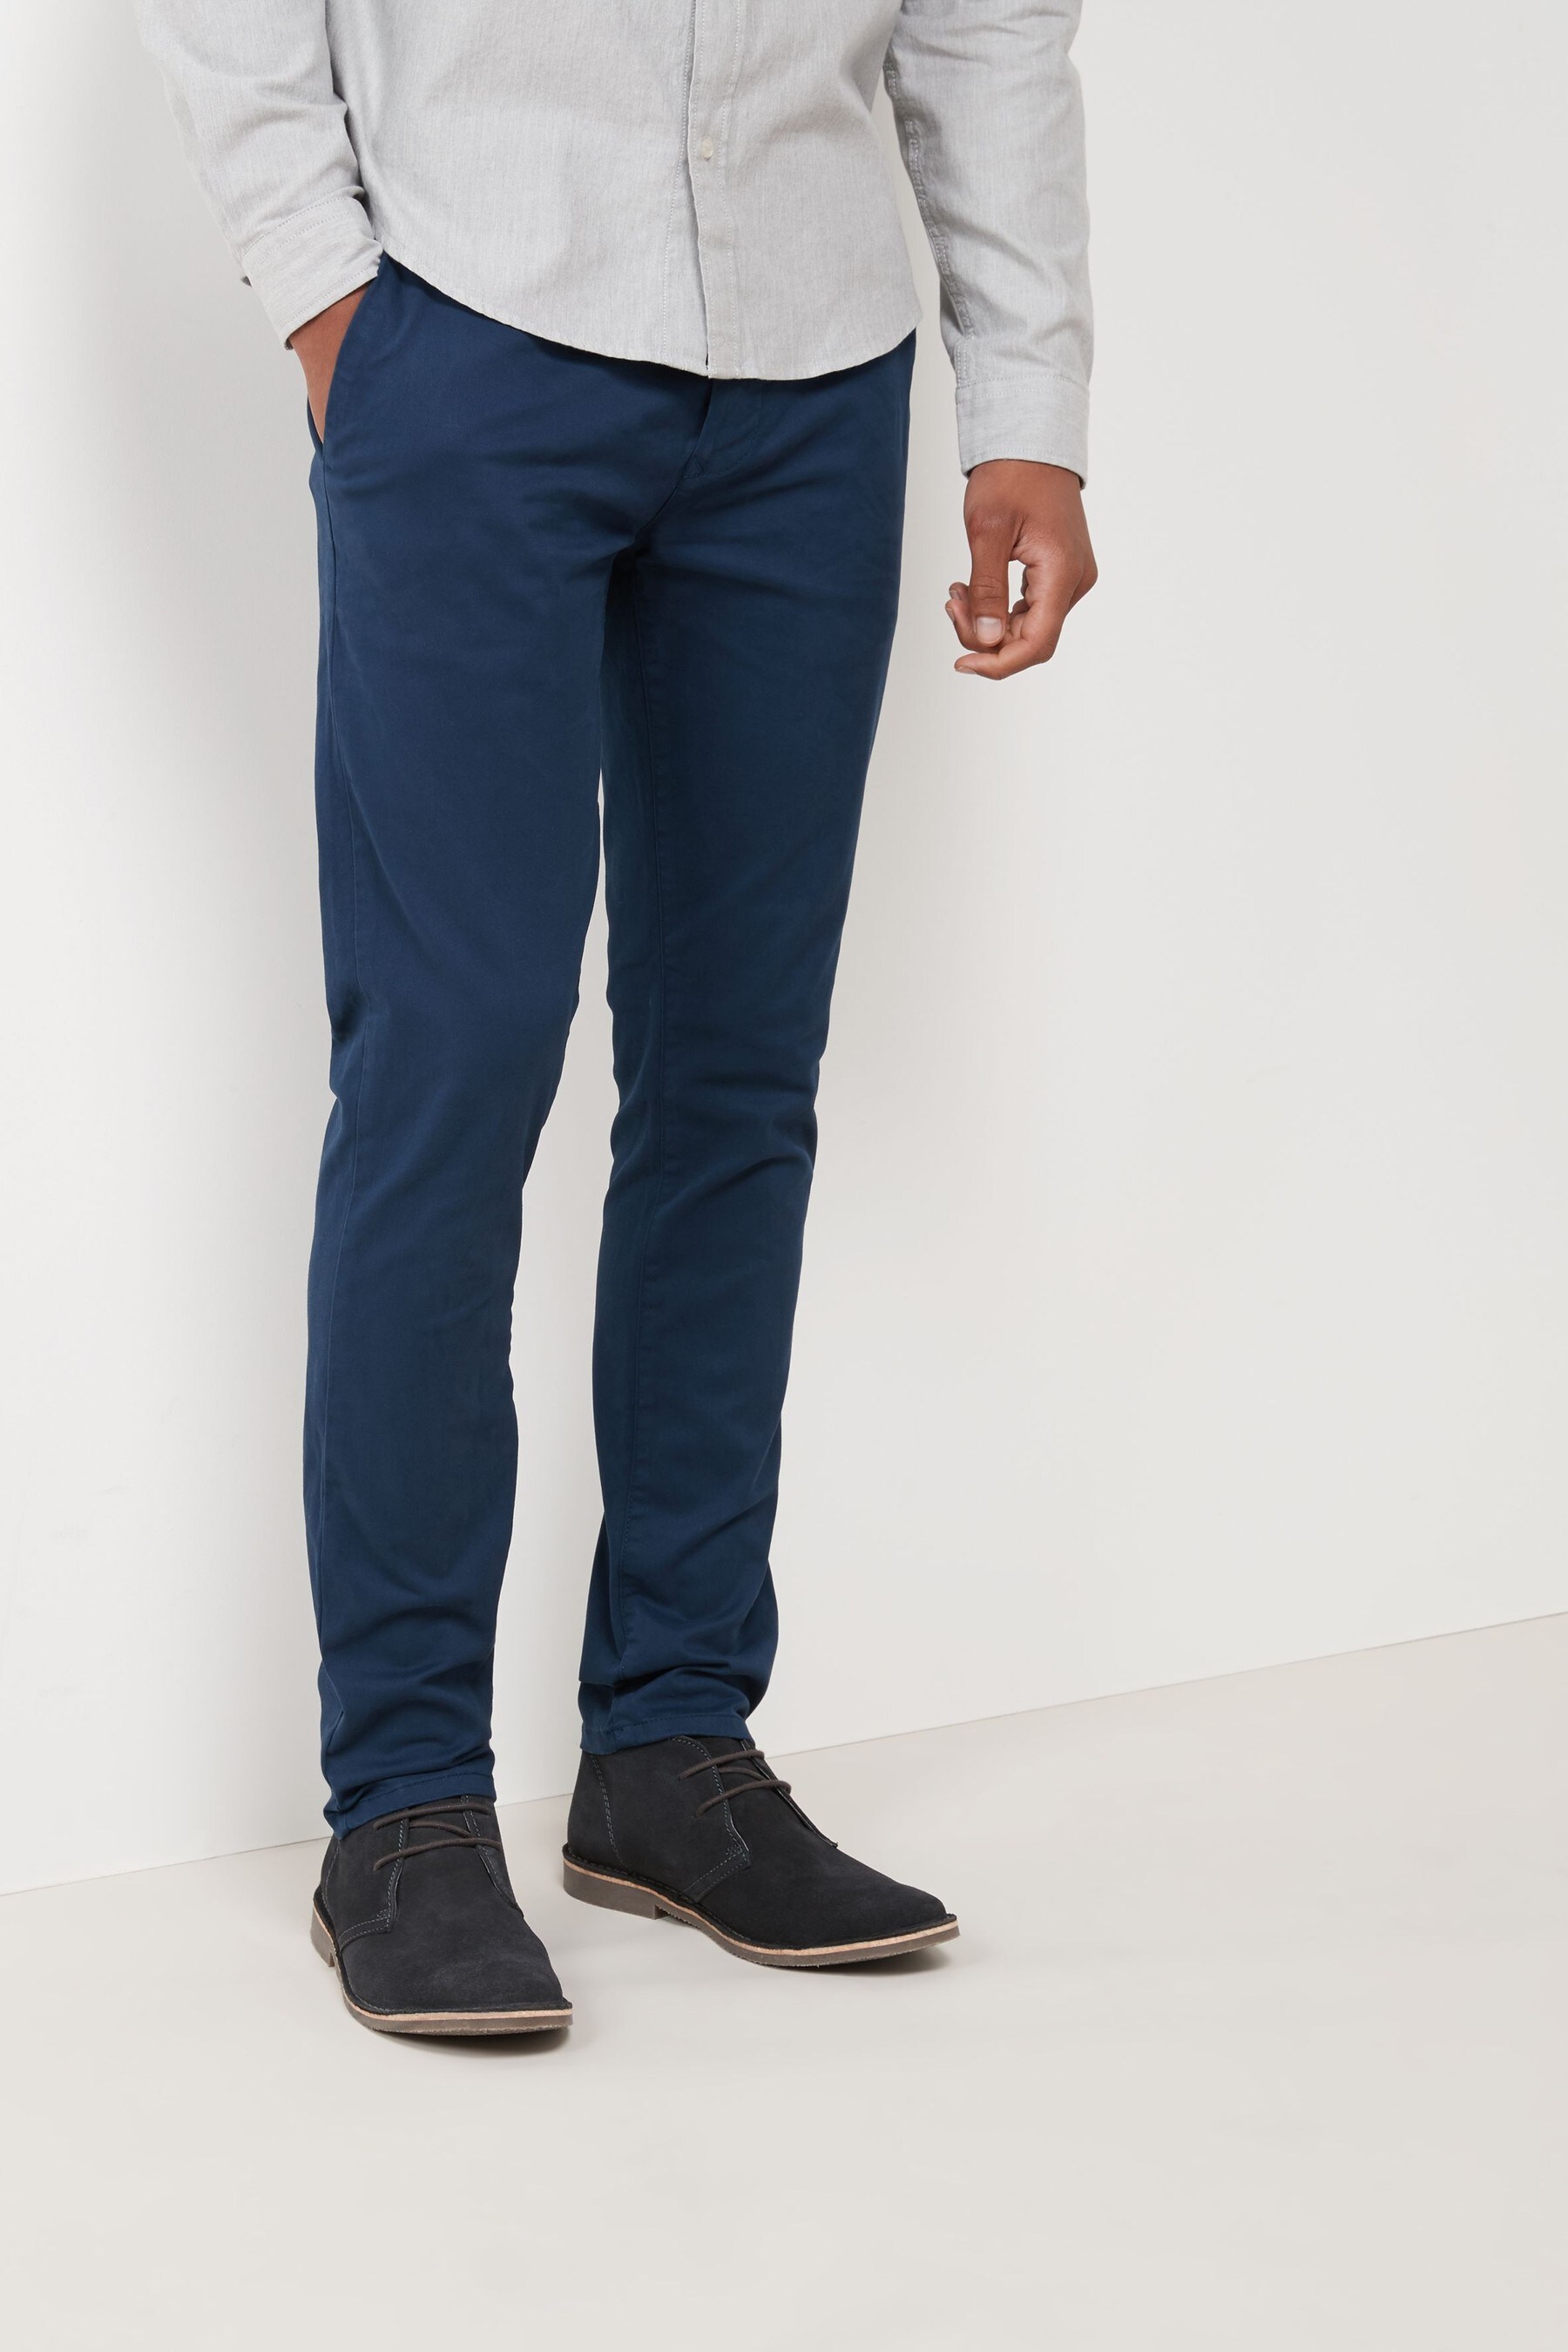 Buy Dark Blue Slim Fit Stretch Chinos from the Next UK online shop